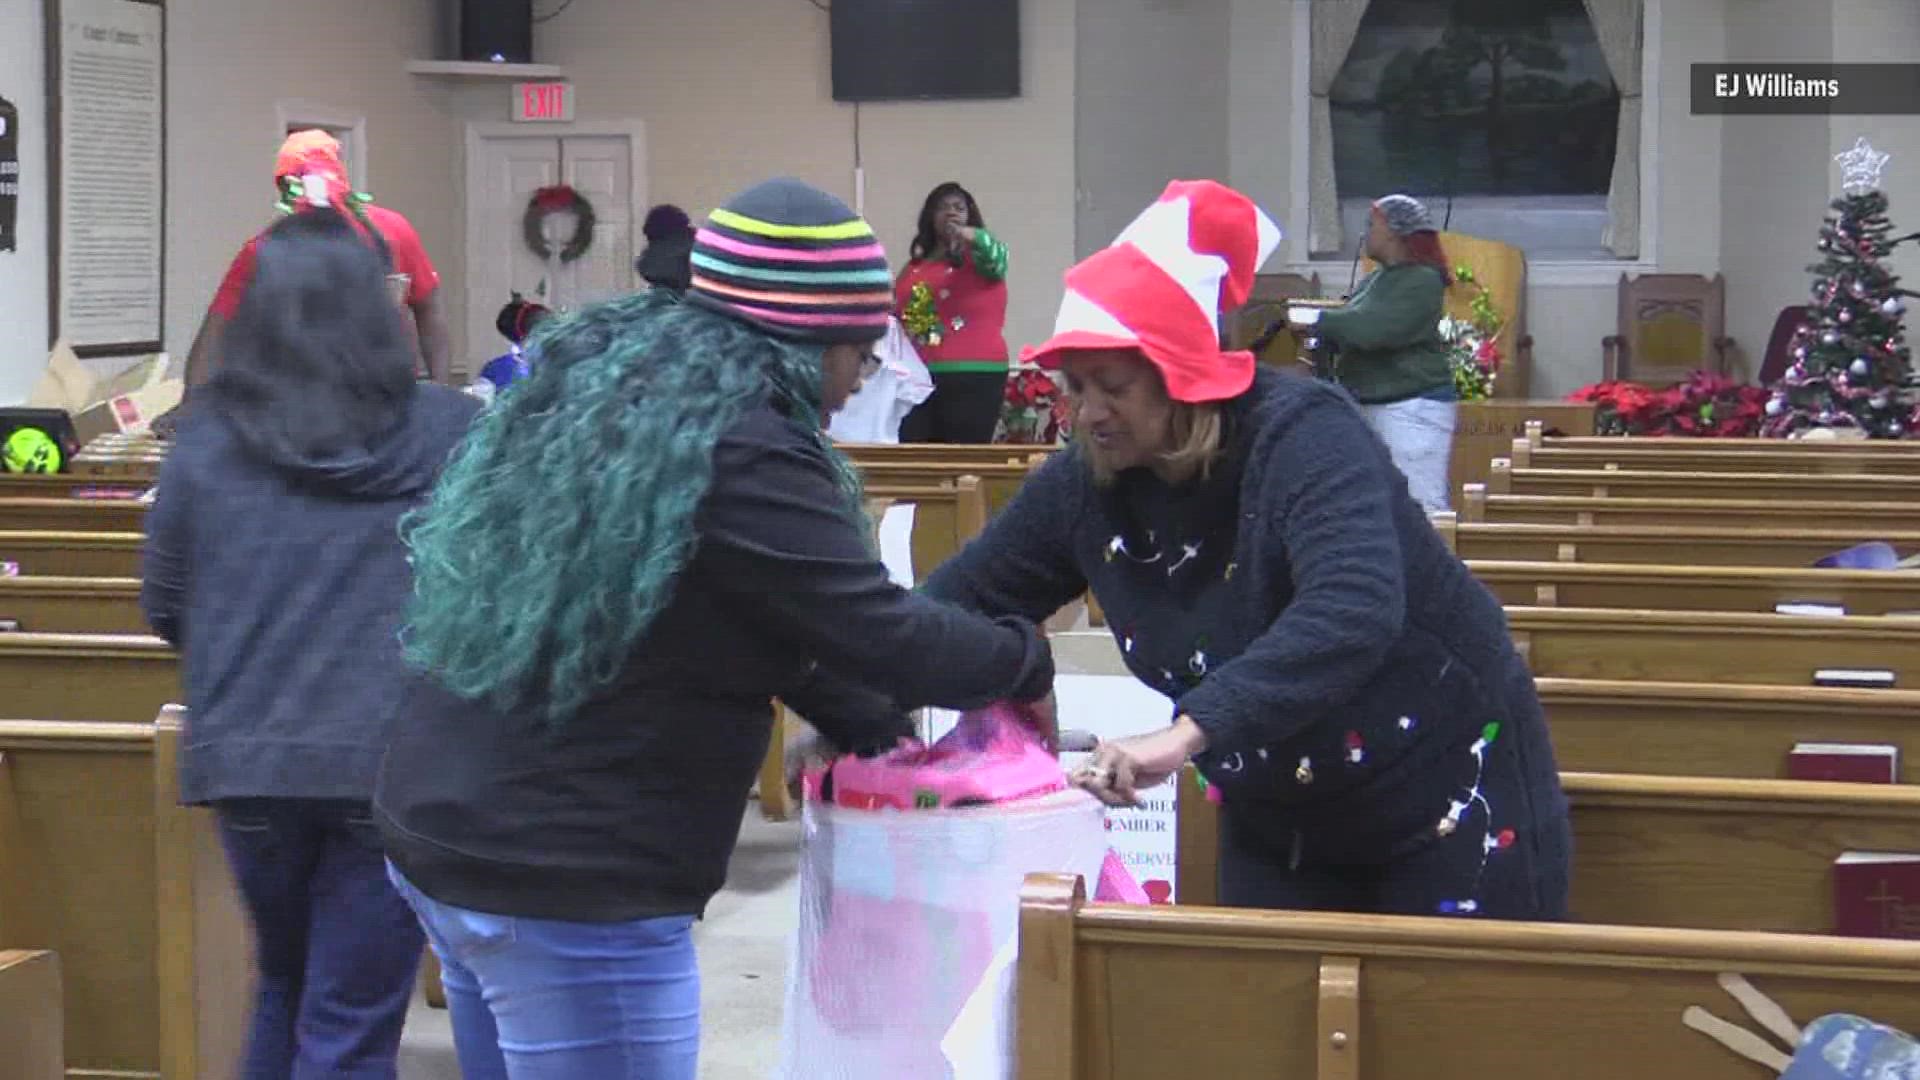 Community 180 and Toys for Tots held their third annual toy giveaway at a church in Orange.